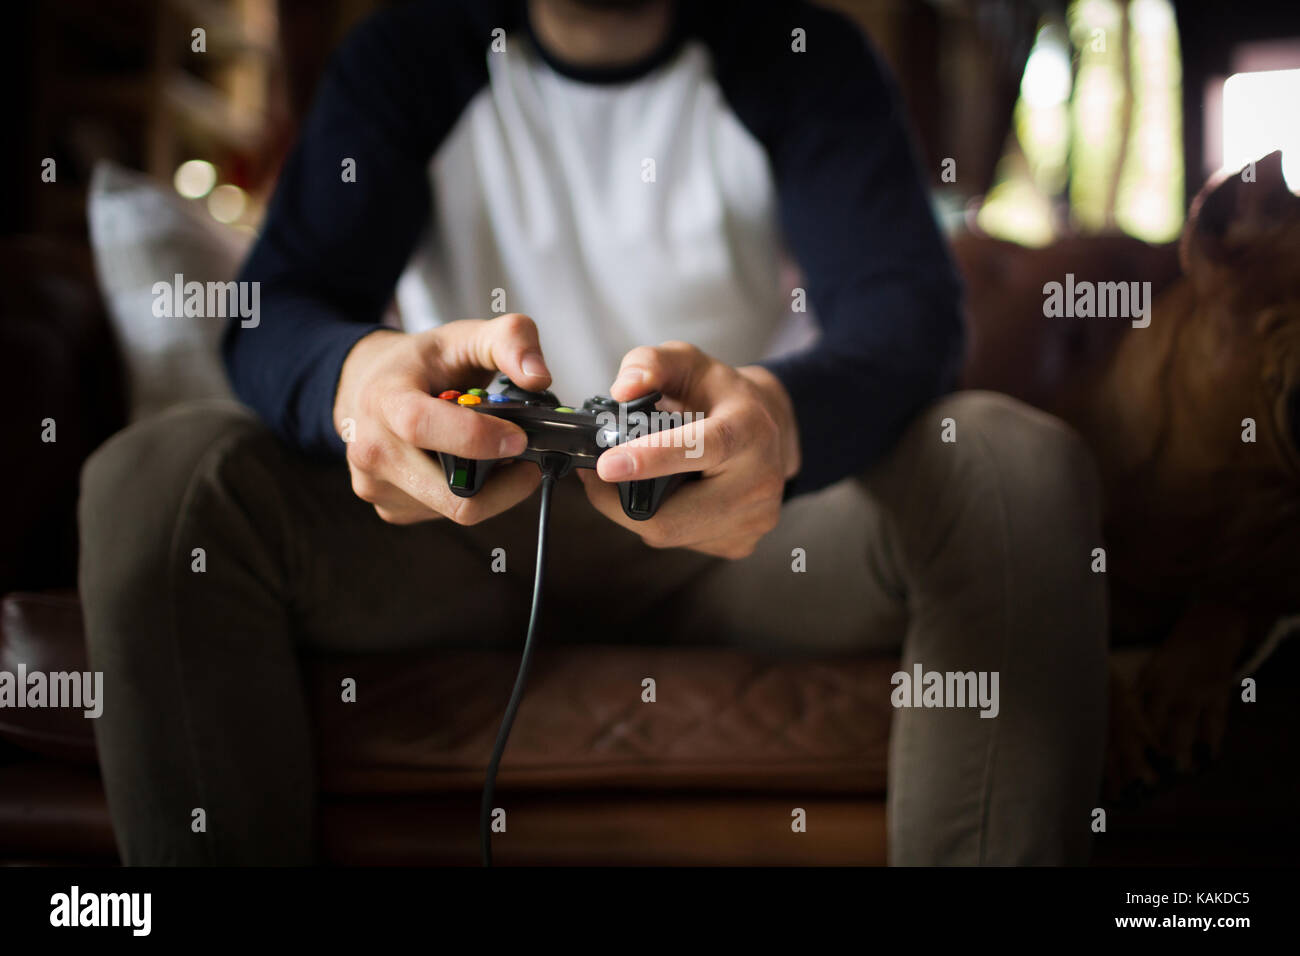 A young man holding joystick, playing video game. Stock Photo